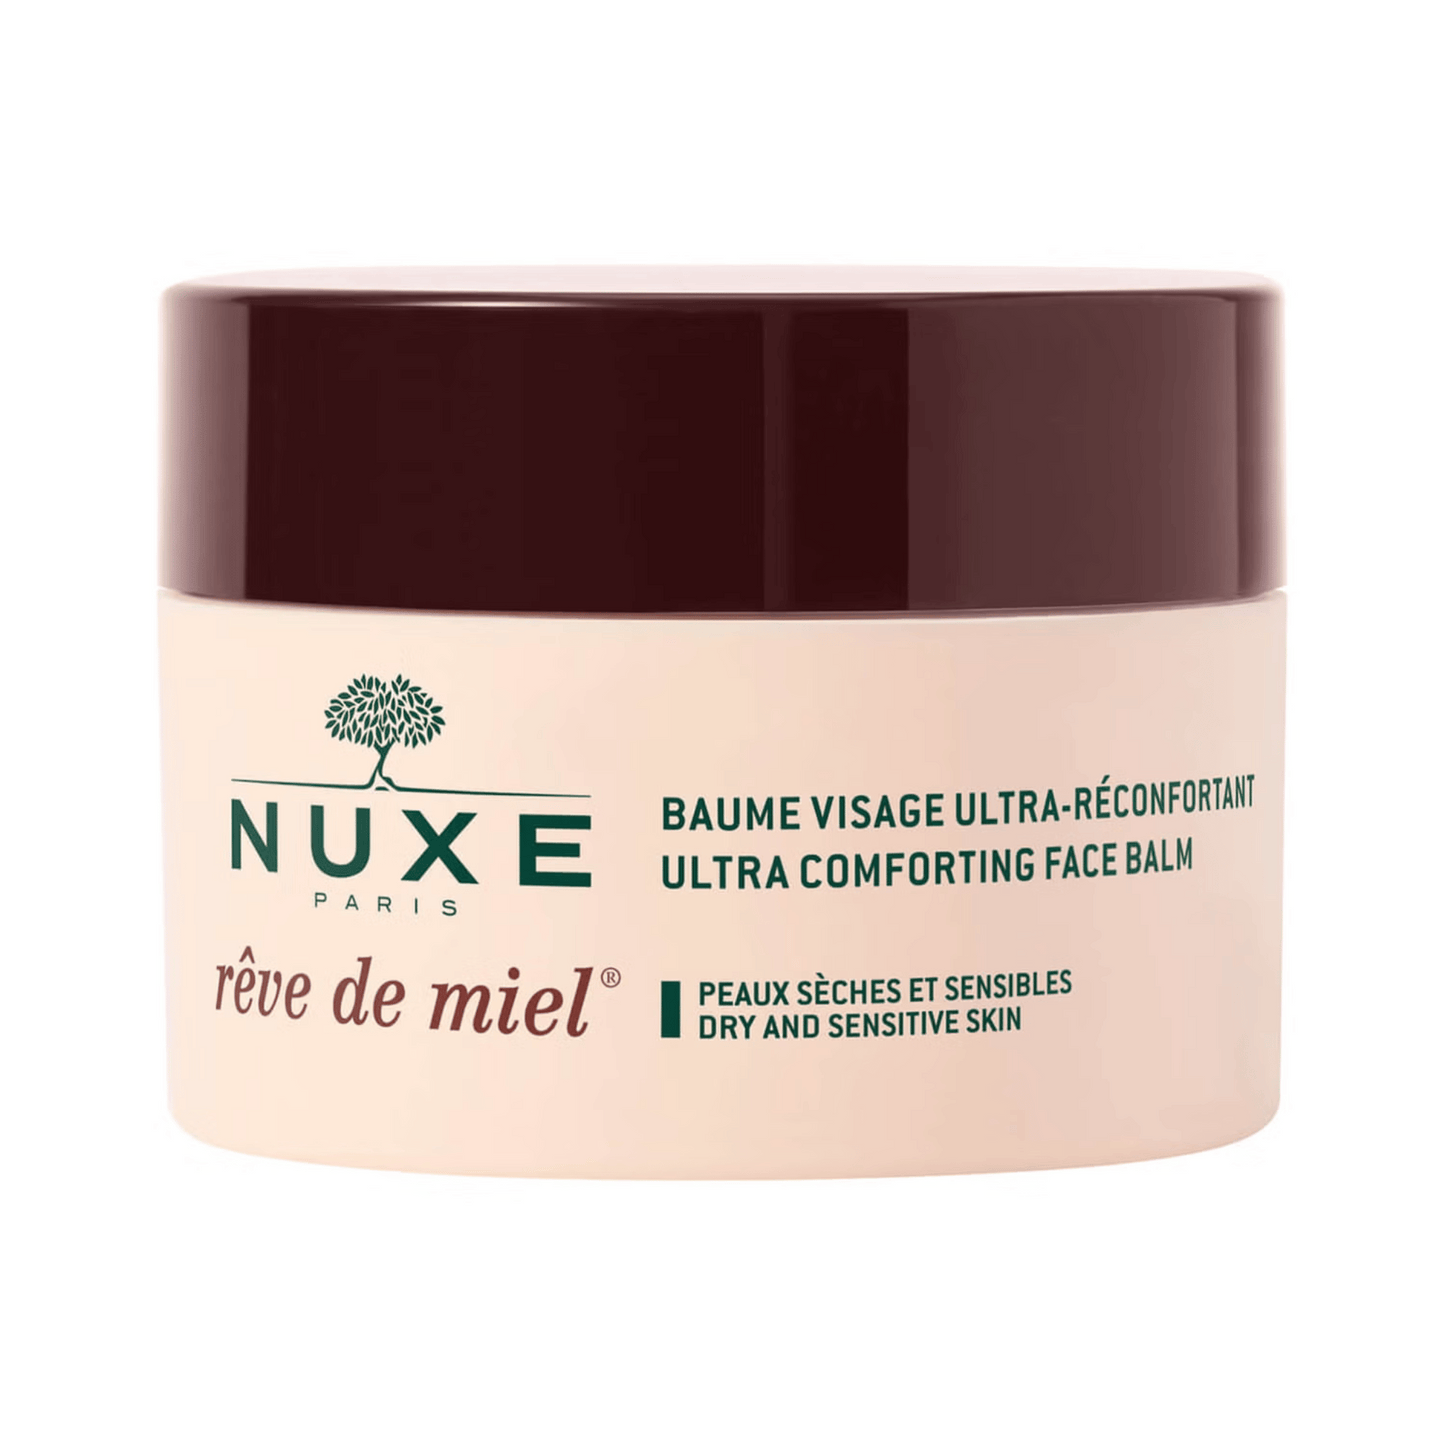 Primary Image of Reve De Miel Ultra Comforting Face Balm 